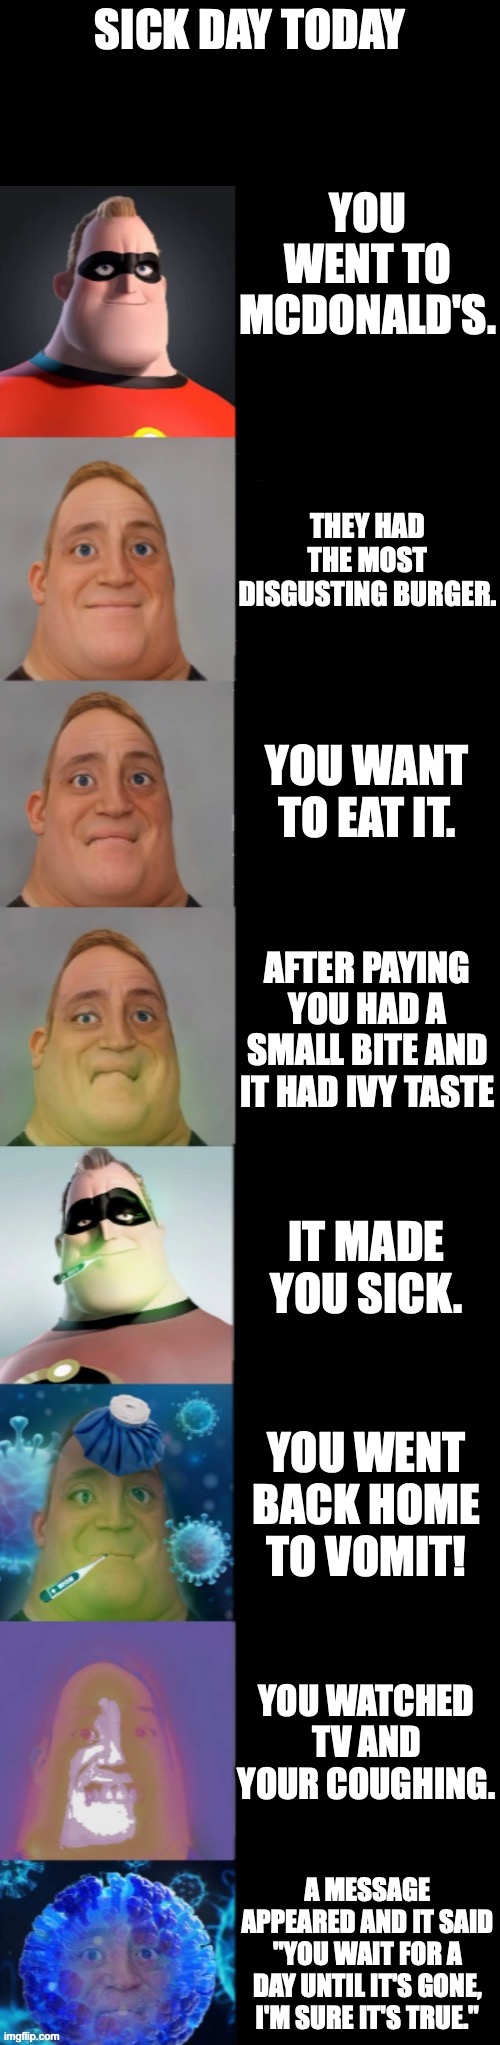 Mr incredible becoming sick(Fixed Textboxes) | SICK DAY TODAY; YOU WENT TO MCDONALD'S. THEY HAD THE MOST DISGUSTING BURGER. YOU WANT TO EAT IT. AFTER PAYING YOU HAD A SMALL BITE AND IT HAD IVY TASTE; IT MADE YOU SICK. YOU WENT BACK HOME TO VOMIT! YOU WATCHED TV AND YOUR COUGHING. A MESSAGE APPEARED AND IT SAID "YOU WAIT FOR A DAY UNTIL IT'S GONE, I'M SURE IT'S TRUE." | image tagged in mr incredible becoming sick fixed textboxes,mr incredible | made w/ Imgflip meme maker